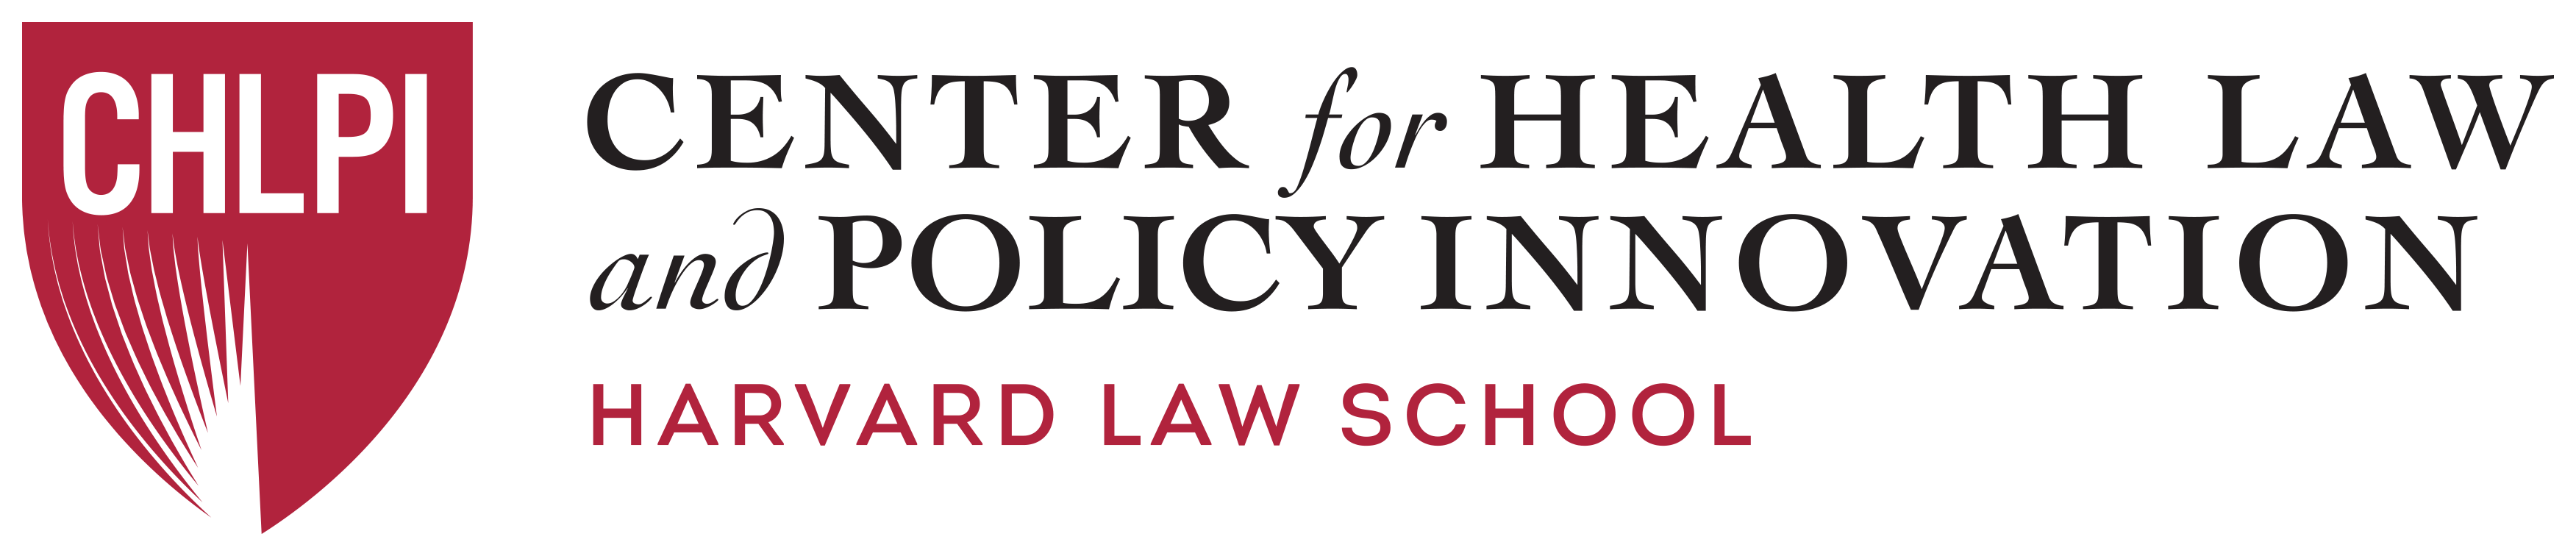 Food Law And Policy Center For Health Law And Policy Innovation